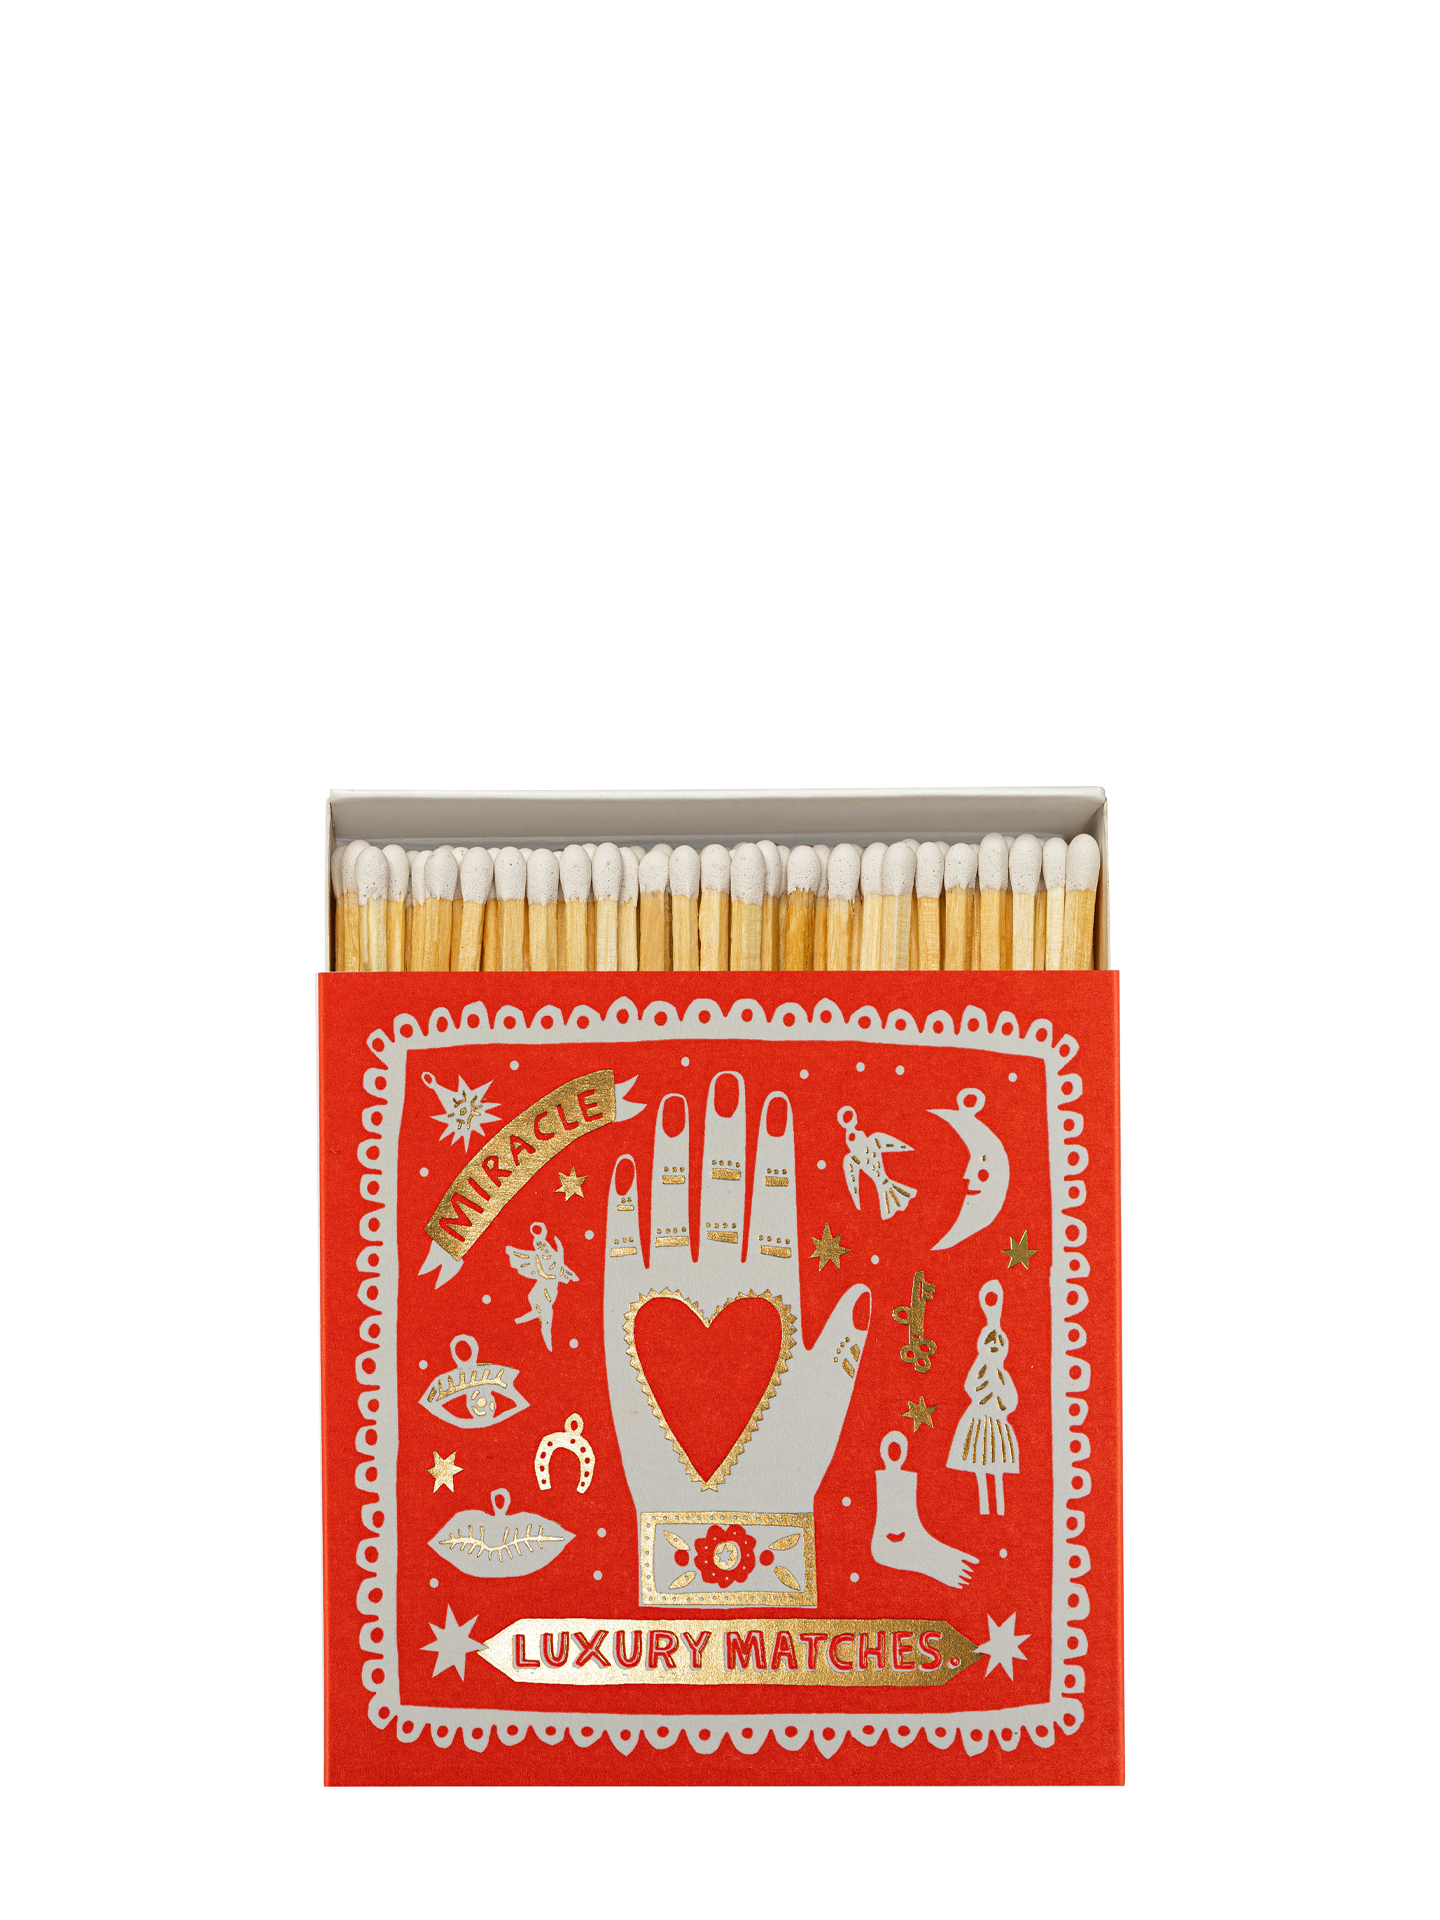 Miracle Luxury Matches (The protective hand)